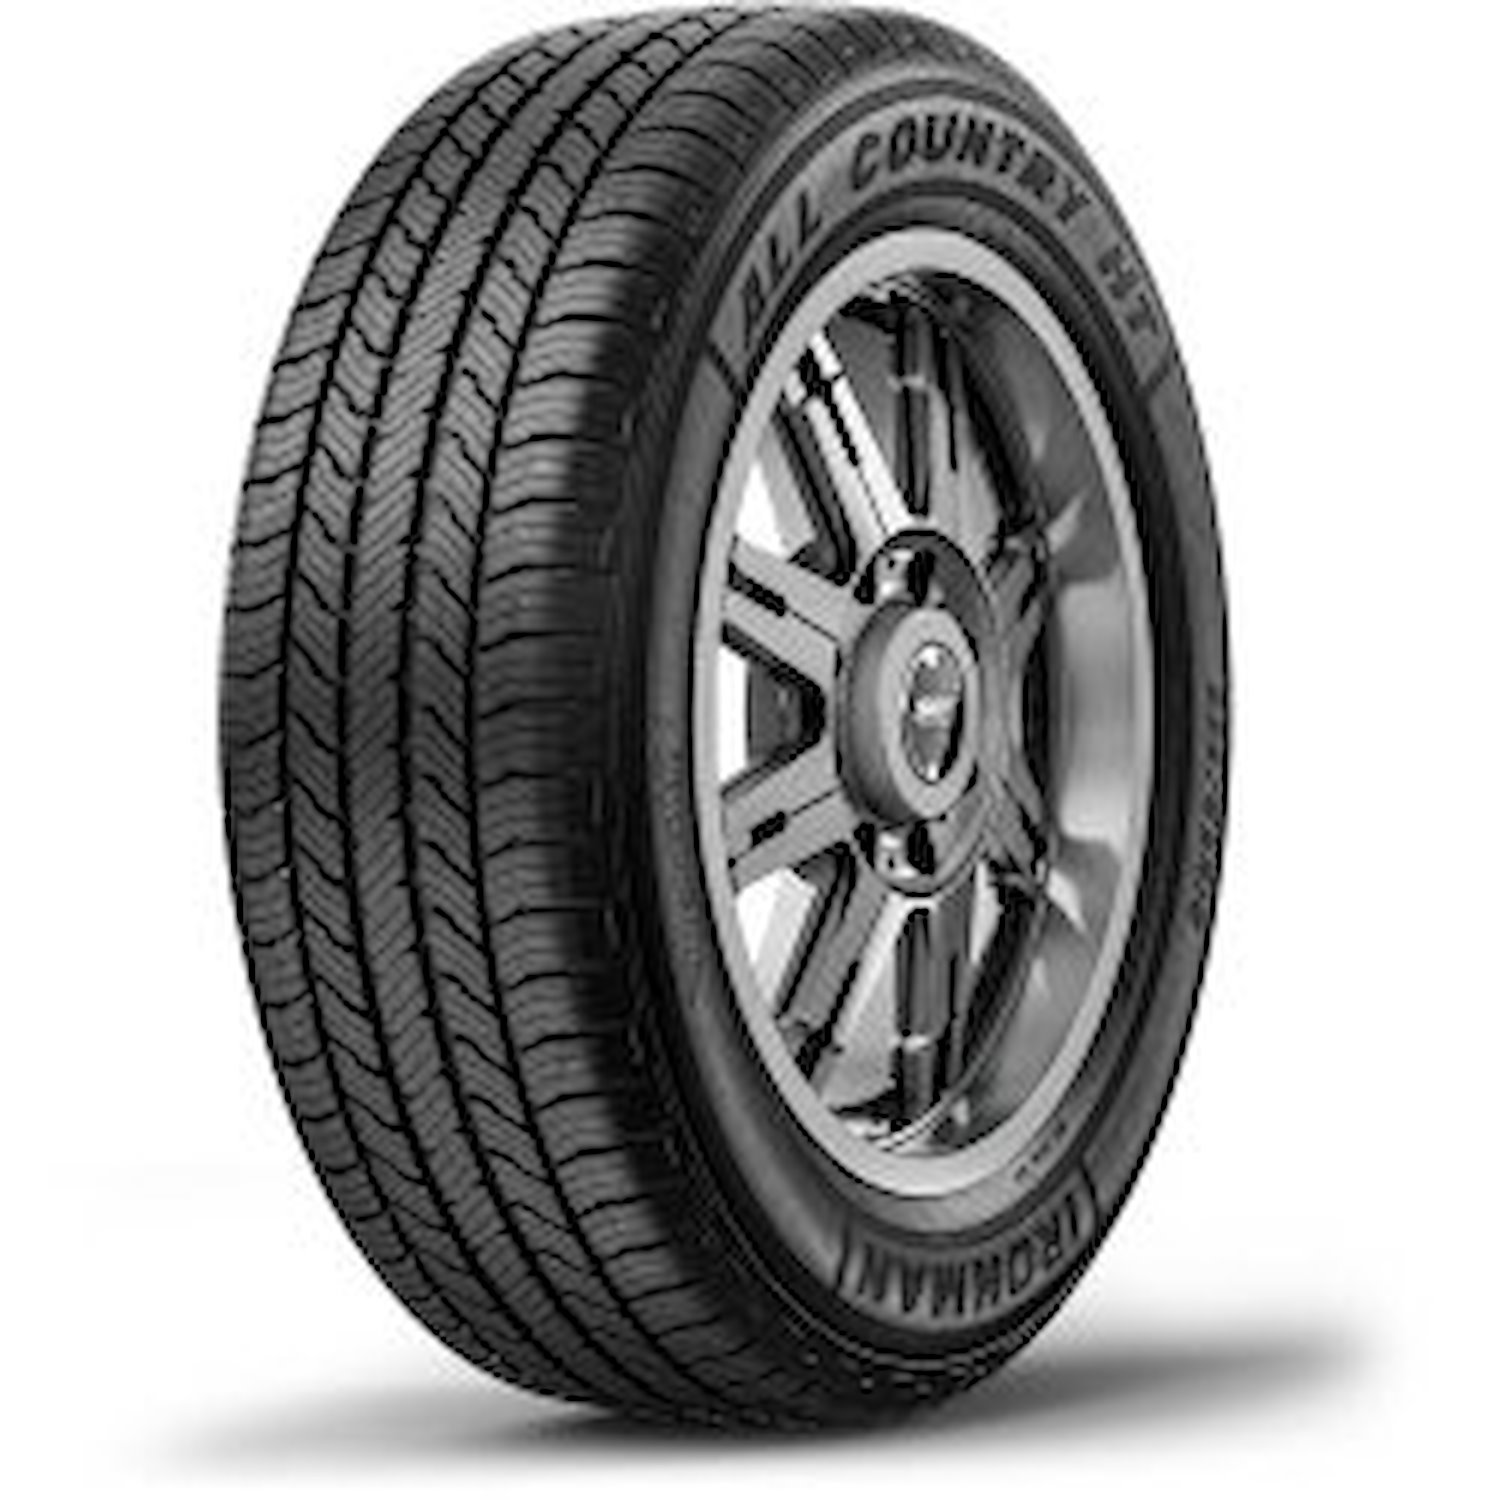 03096 All Country HT Tire, 225/65R17, 102T